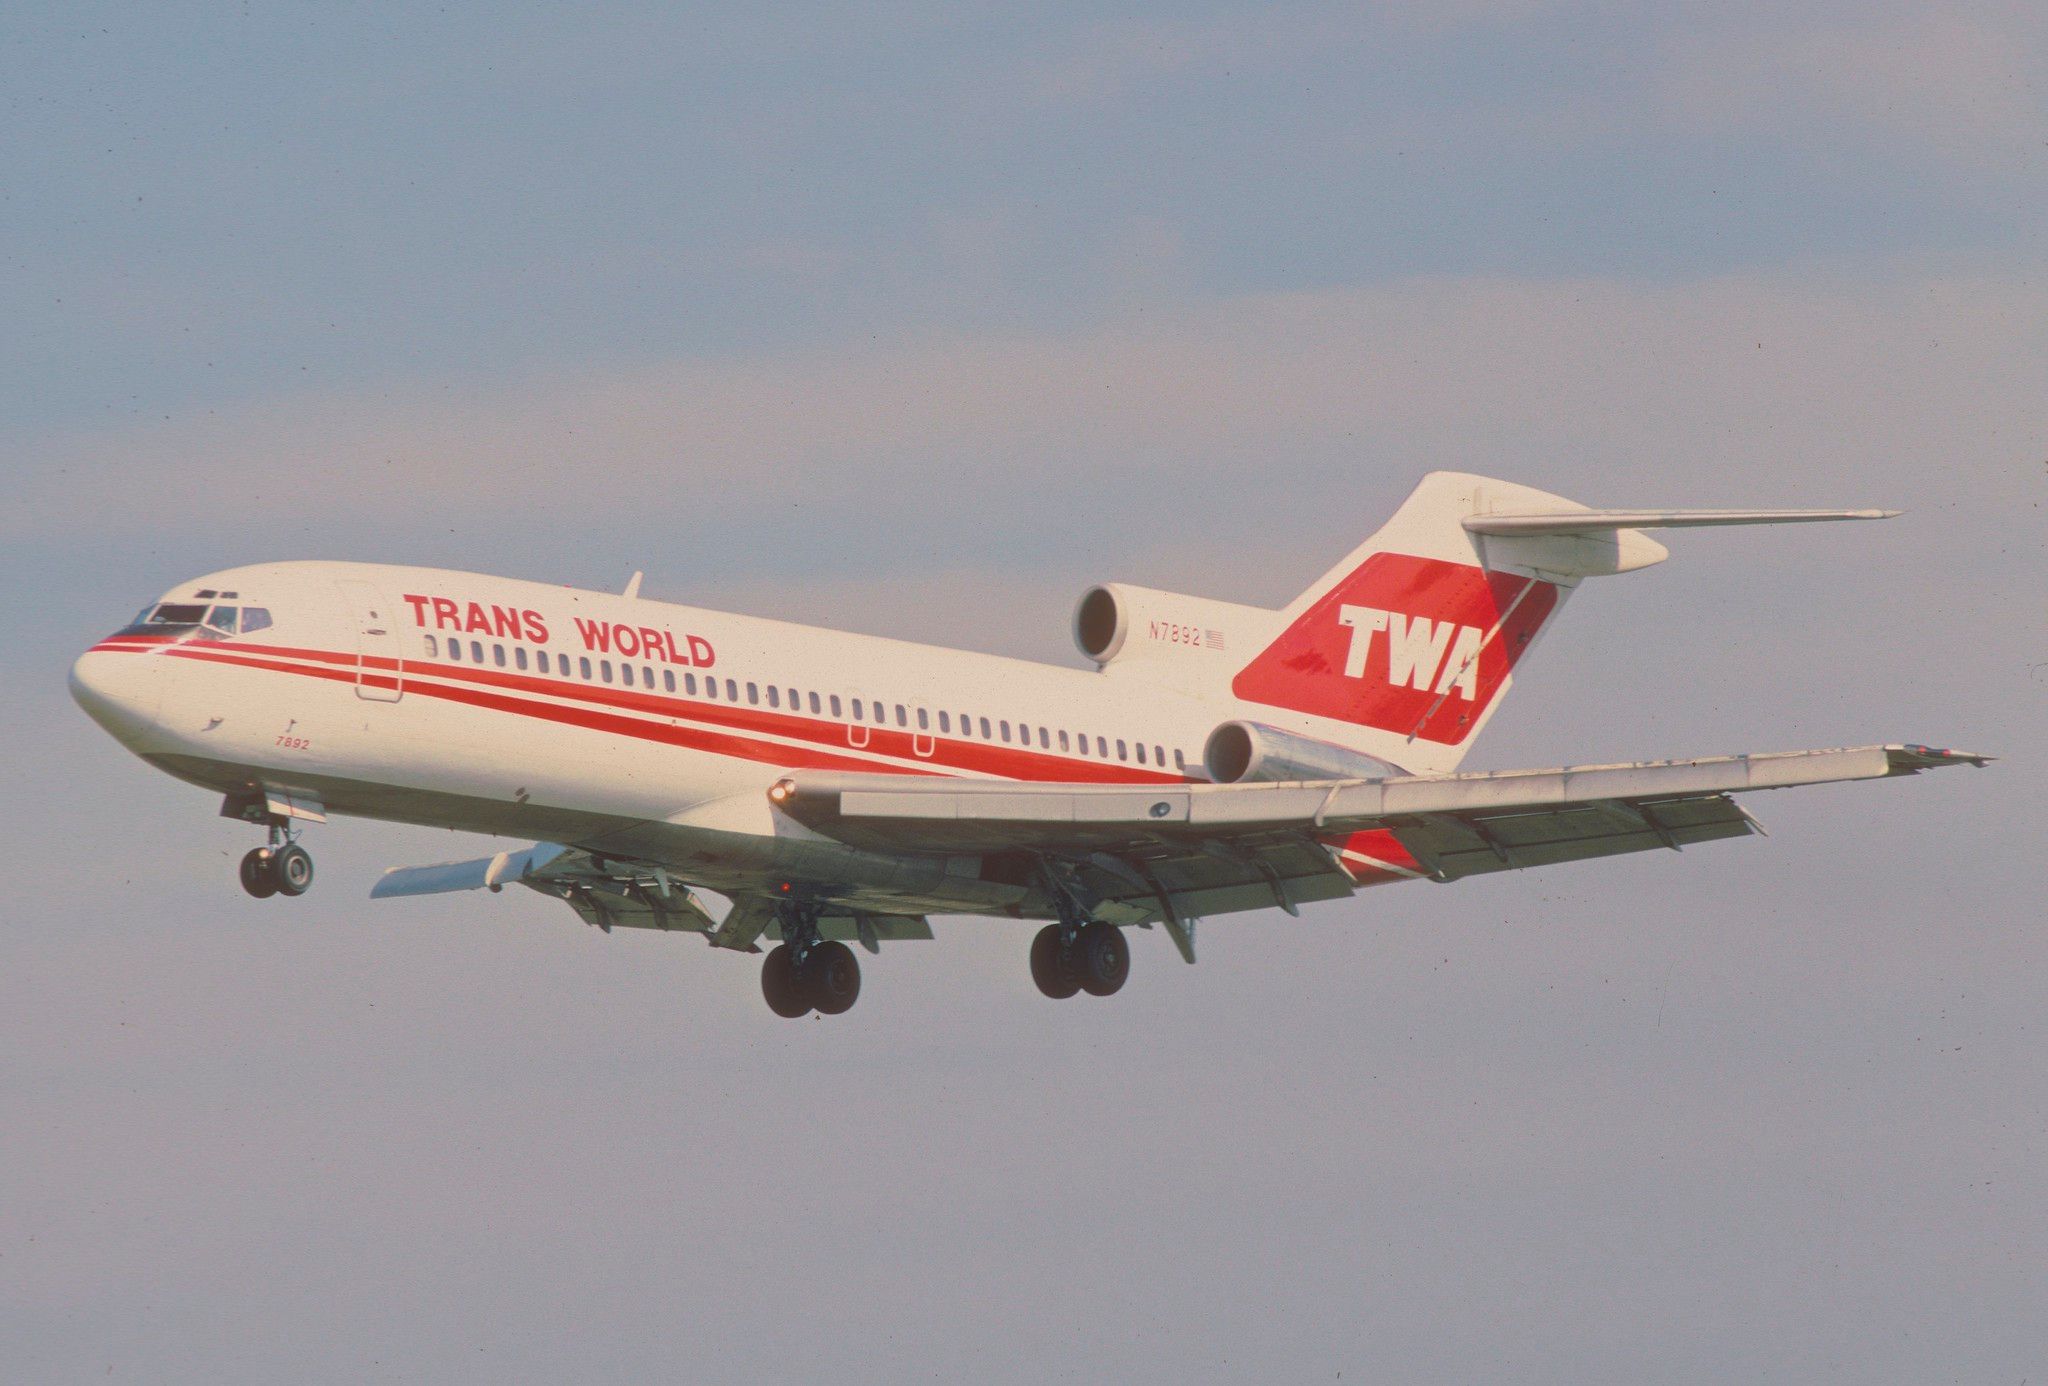 Replying to @Overture 🛩 TWA Flight 841 was a scheduled passenger